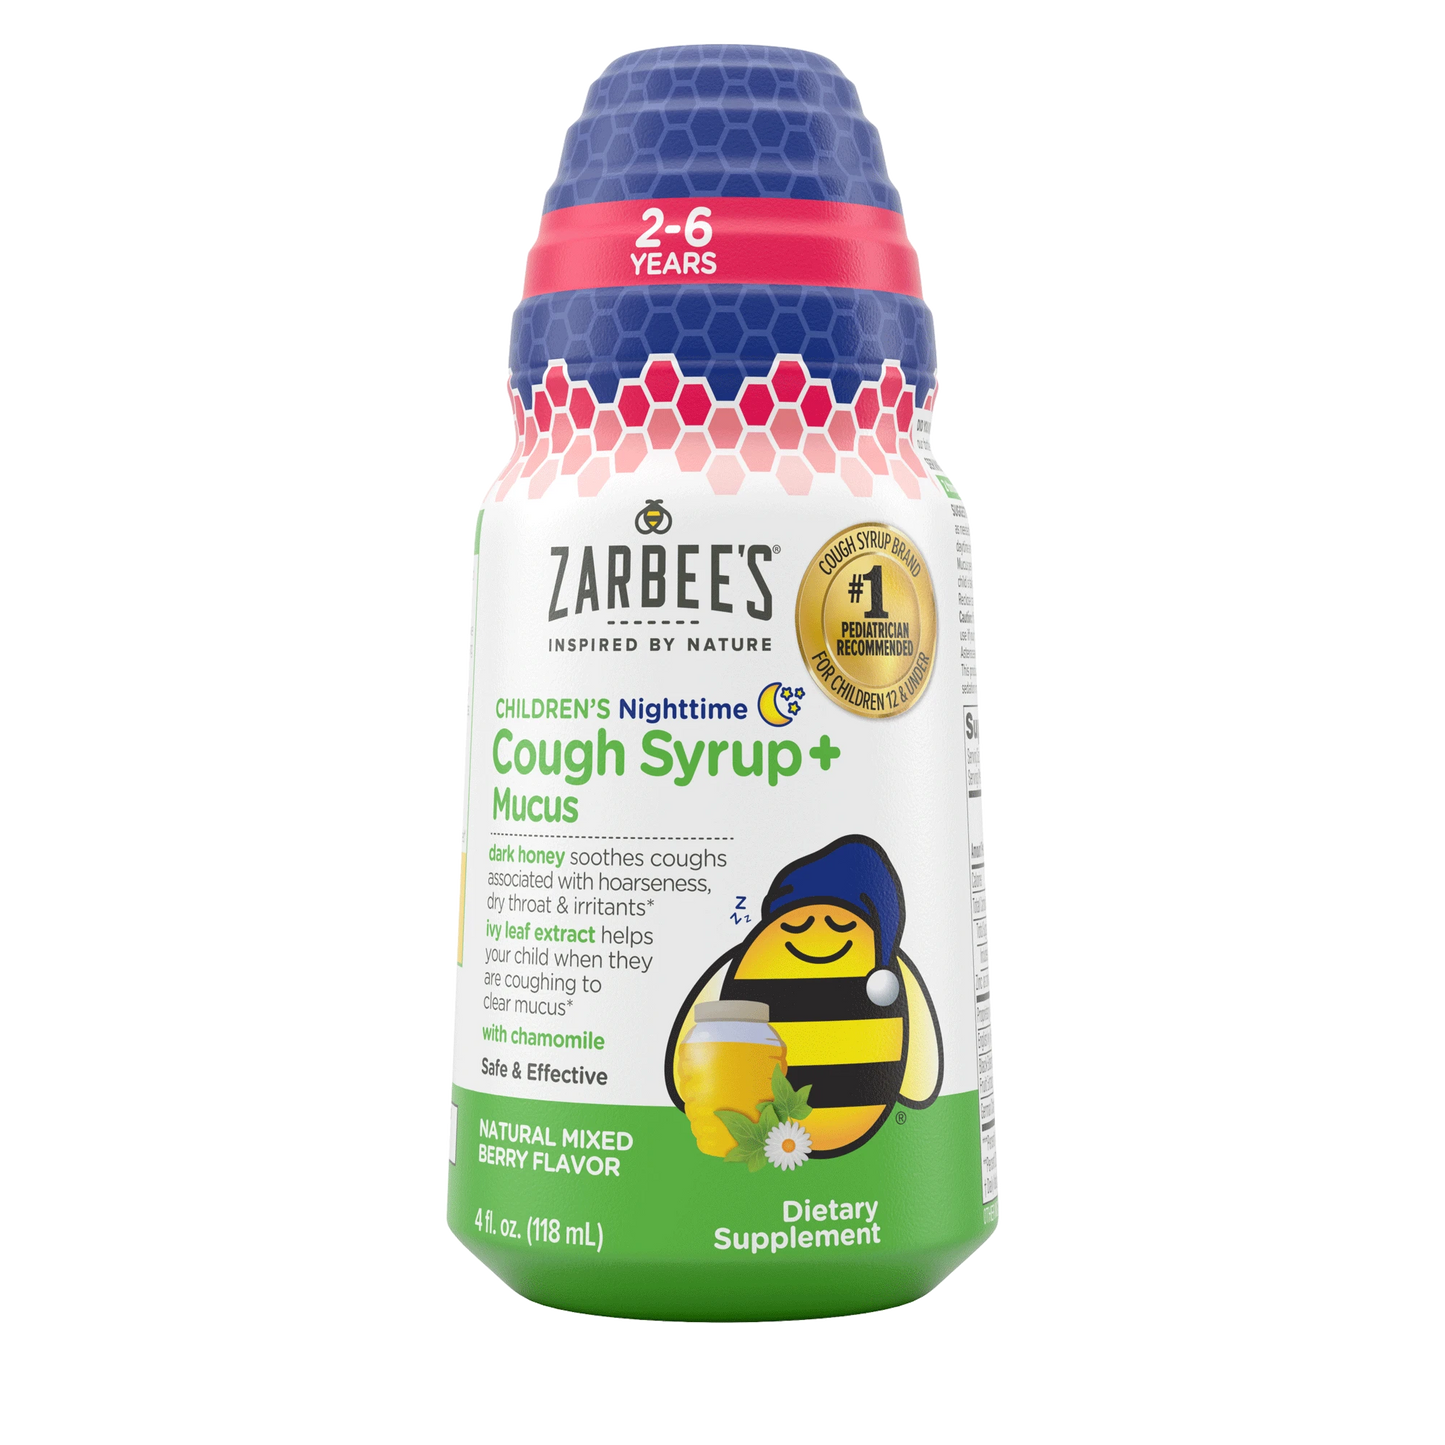 ZARBEE’S COUGH SYRUP + MUCUS